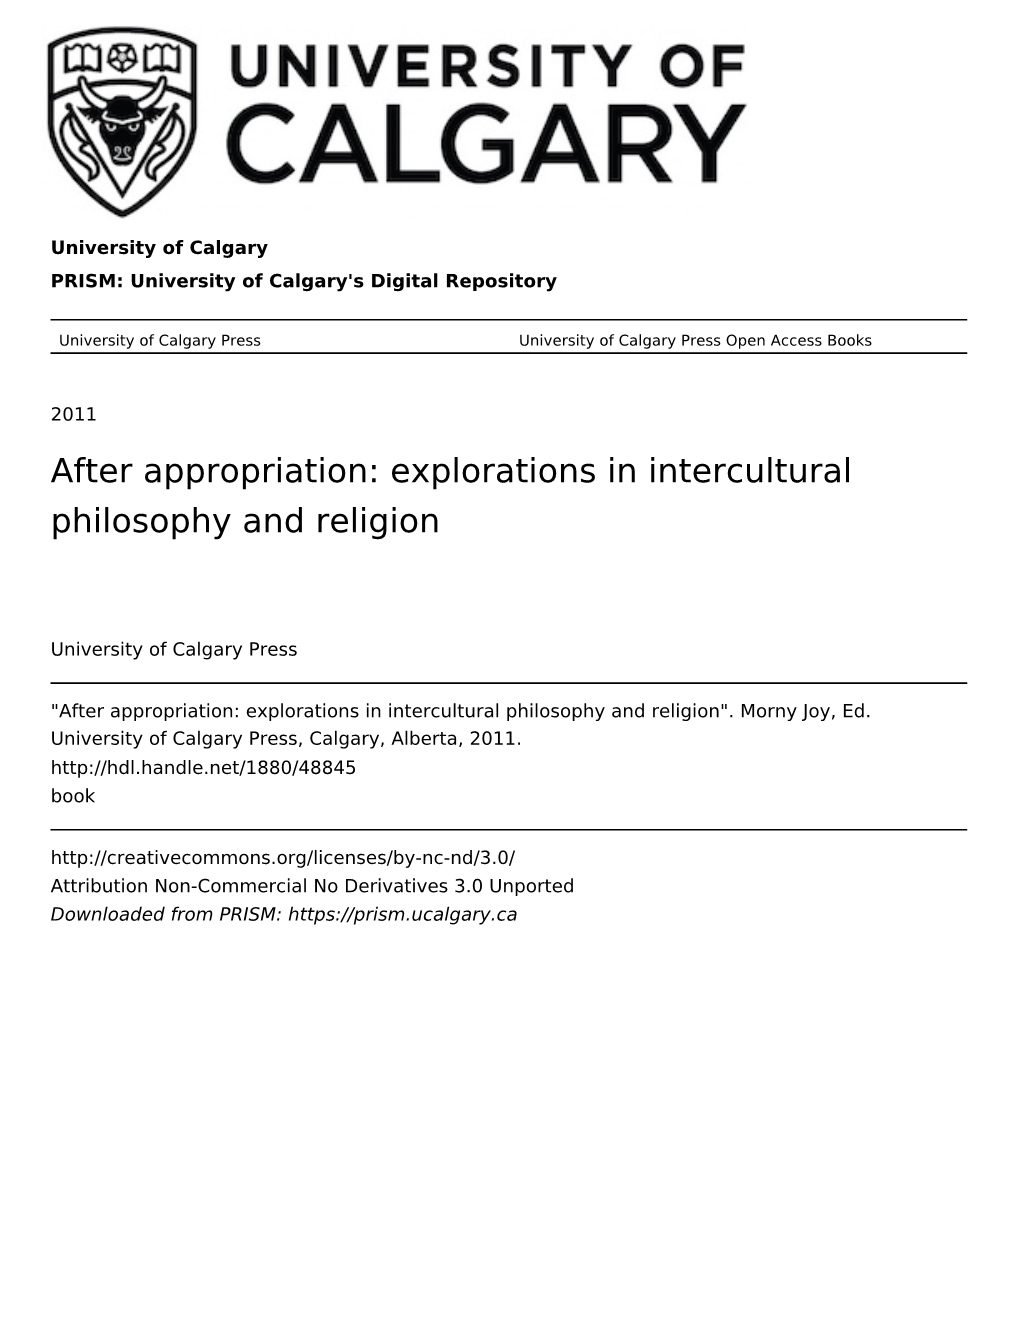 After Appropriation: Explorations in Intercultural Philosophy and Religion